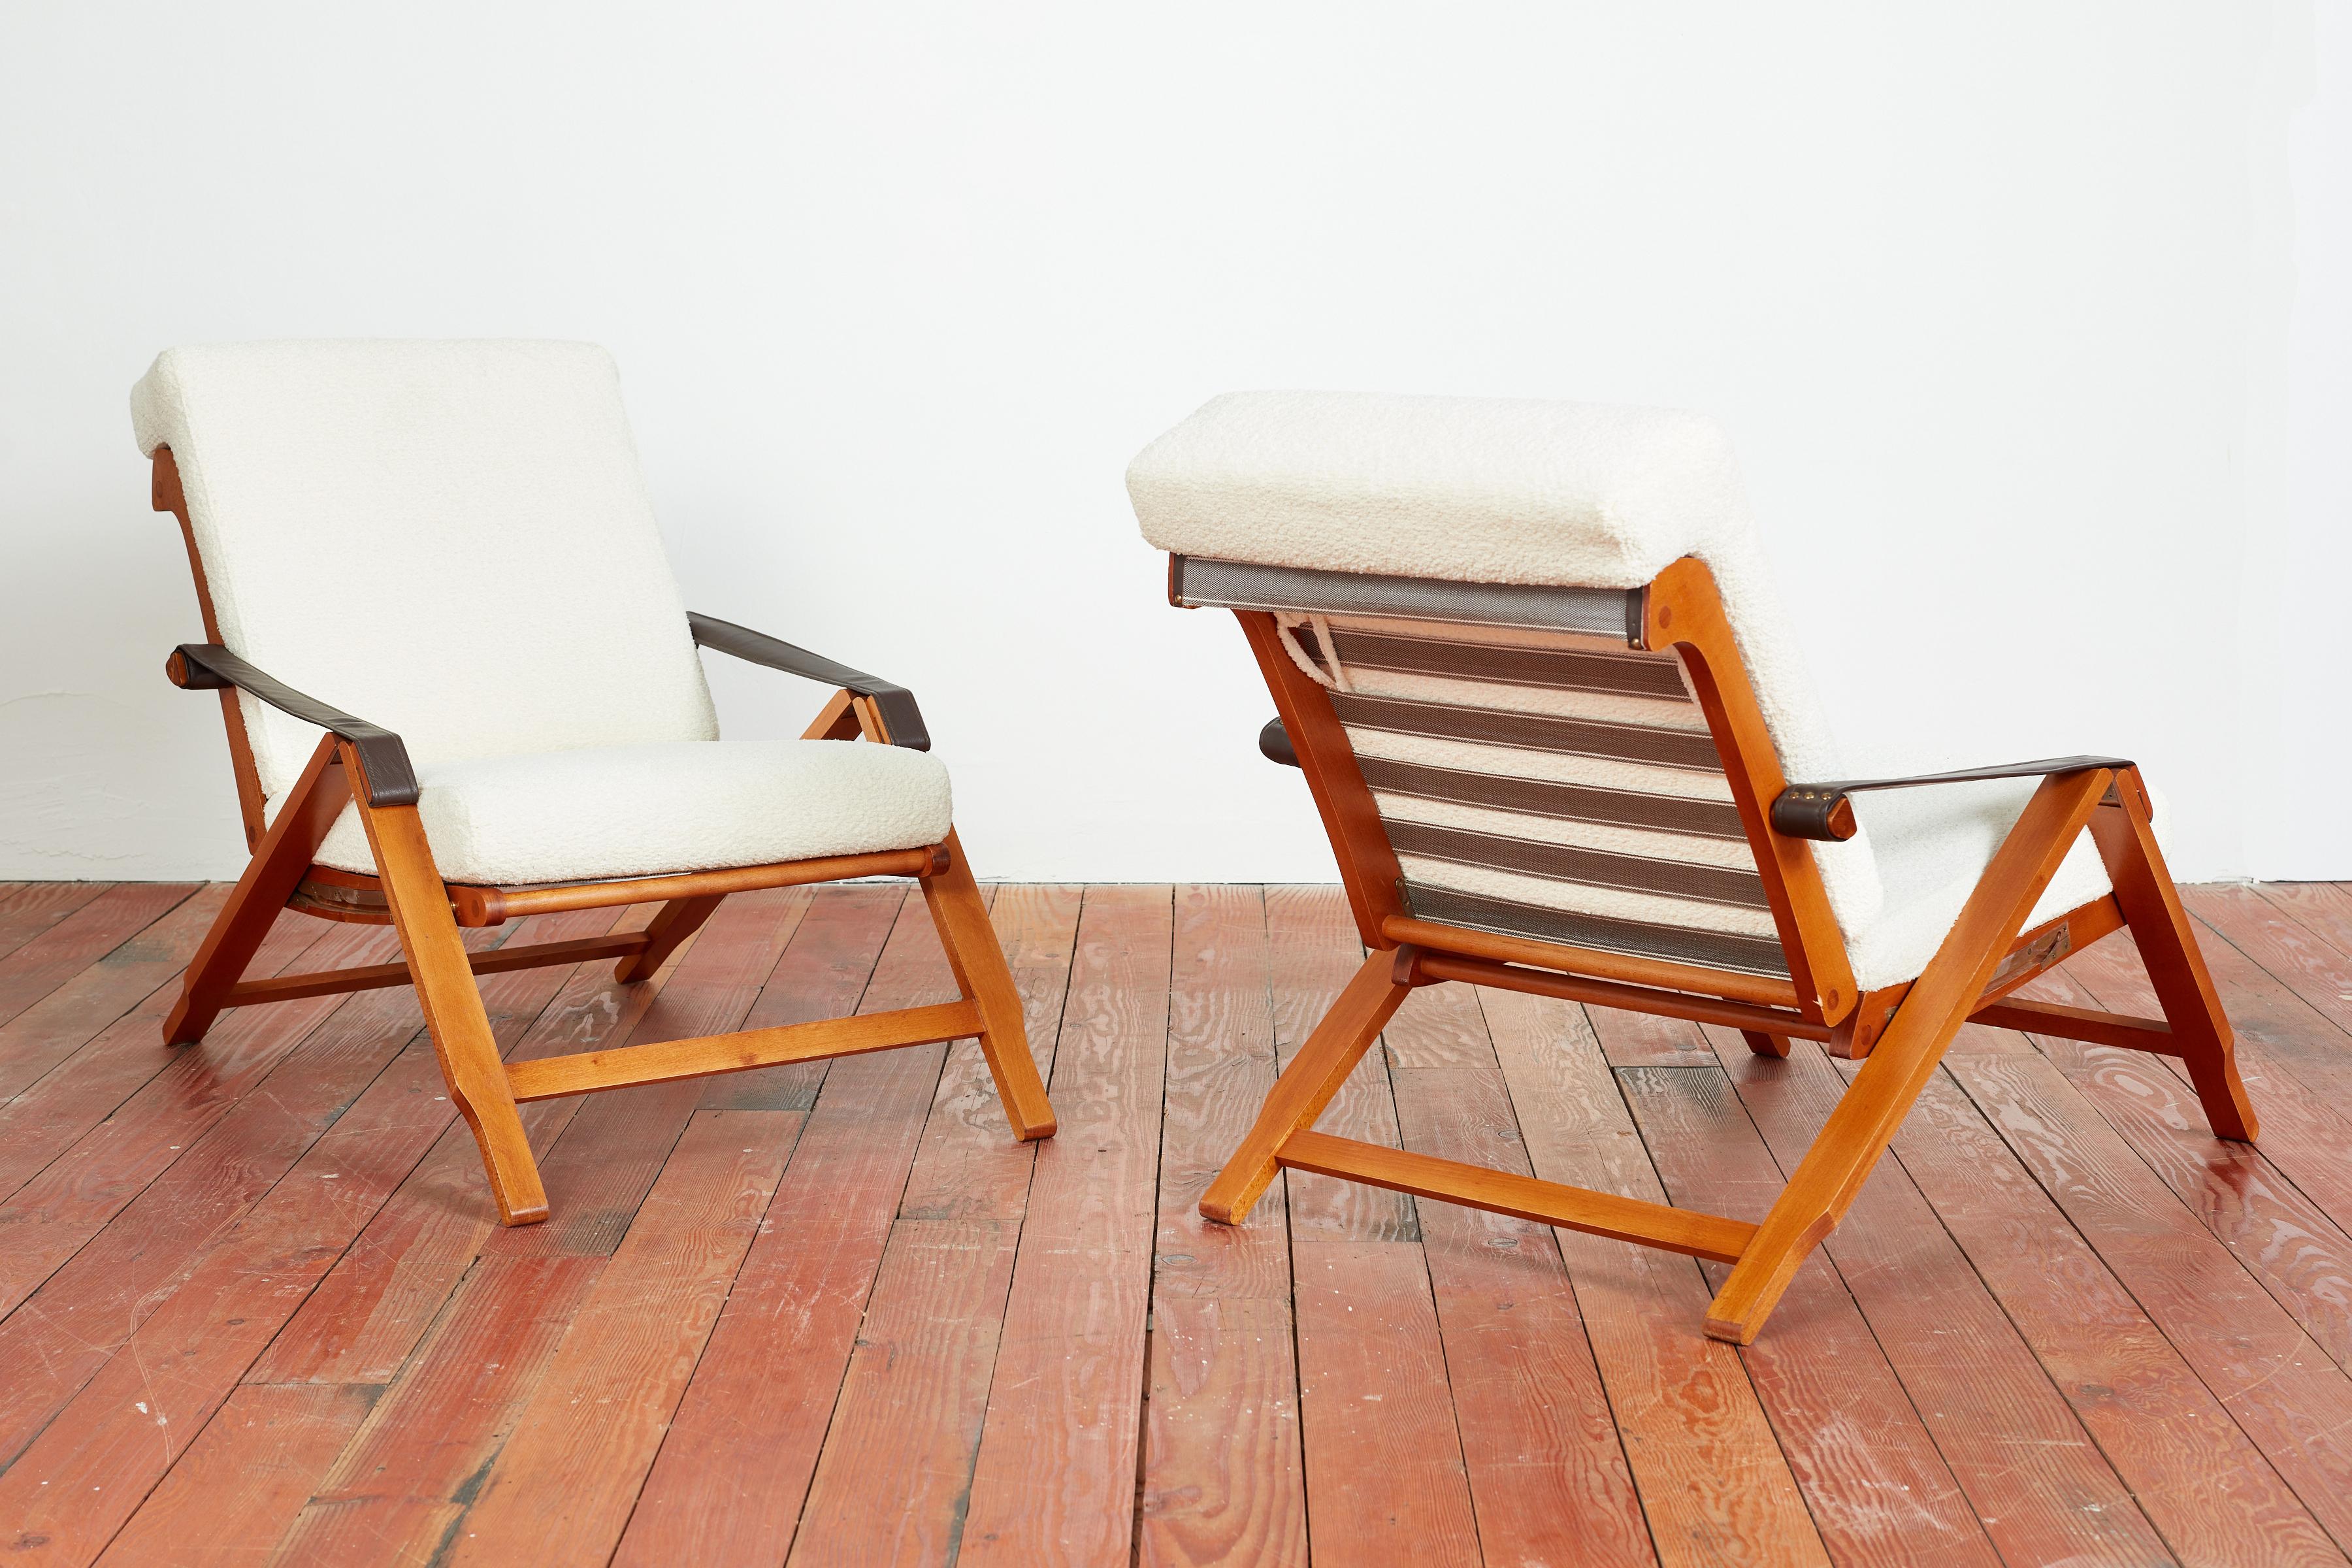 Marco Zansuo adjustable armchairs - Italy 1960's

Chairs have wooden L-shape base with an inlayed brass mechanism on the side that can recline seat into four different positions. 

Original leather armrests and newly upholstered seats in creamy